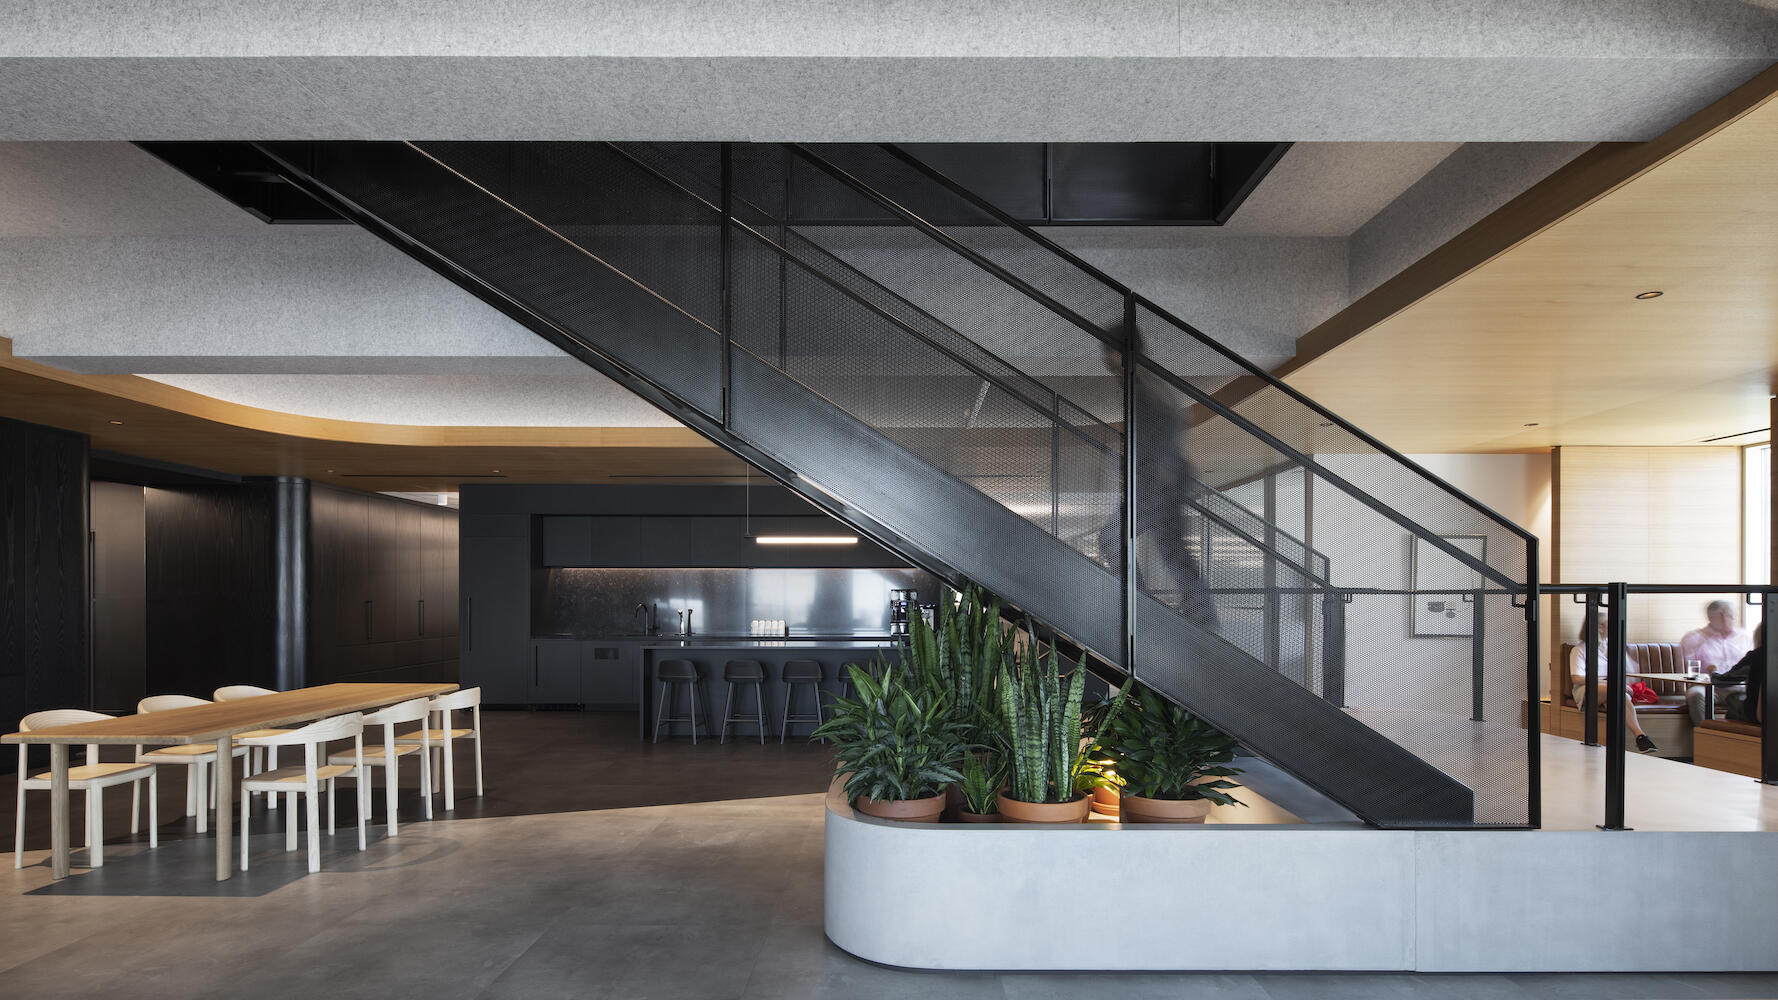 The Revamp of a Top Law Firm’s Montreal Headquarters Emphasizes Openness and Hospitality